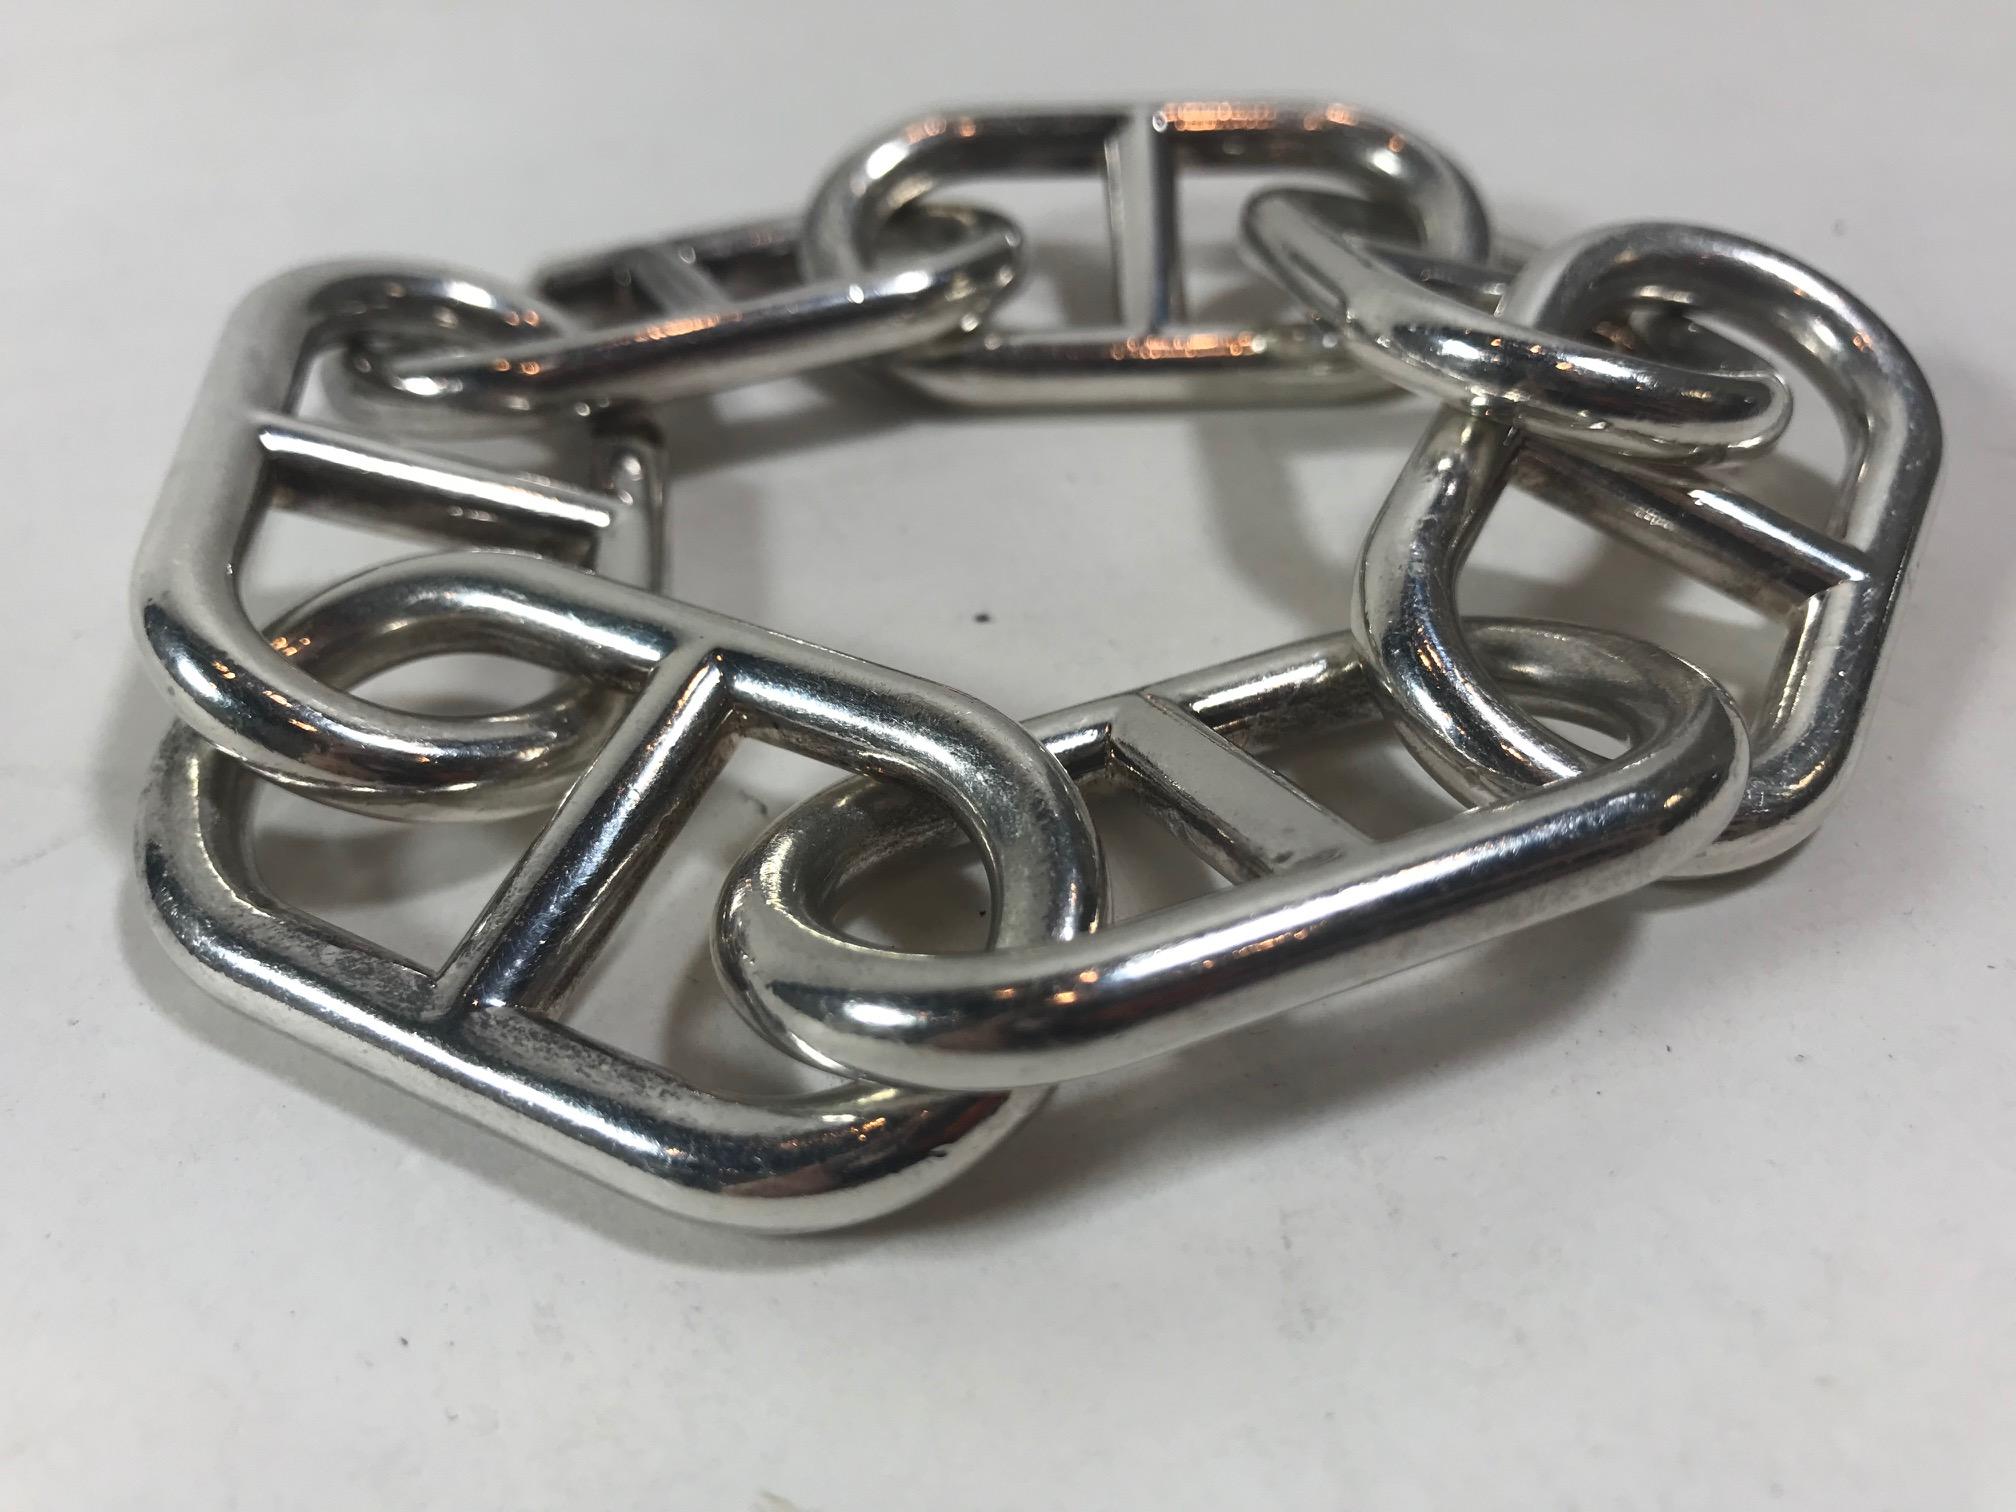 Rare vintage linked bracelet. 7 large metallic sterling silver links. Hidden slip-on slip-off closure within links. Circumference: 11 inches Retail Price: 3,050